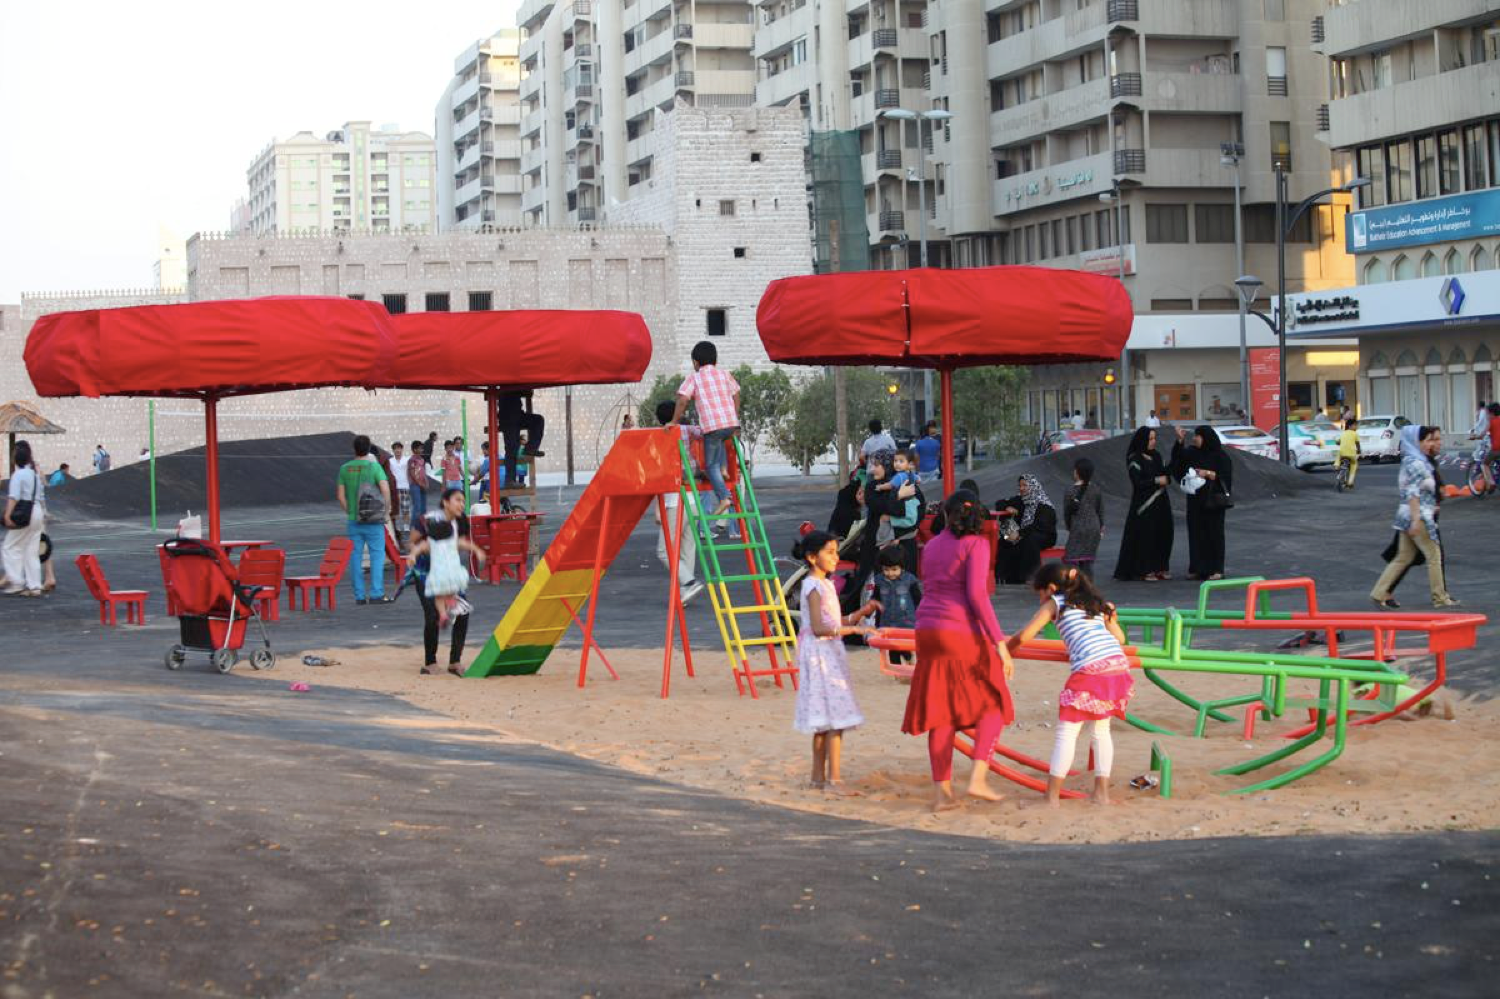 Superflex (in collaboration with Schul Landscape Architects, Copenhagen), 'The Bank,' 2013. Public space, Bak Street. Commissioned by the Sharjah Art Foundation. Installation view: Sharjah Biennial 11. Image courtesy of the Sharjah Art Foundation.